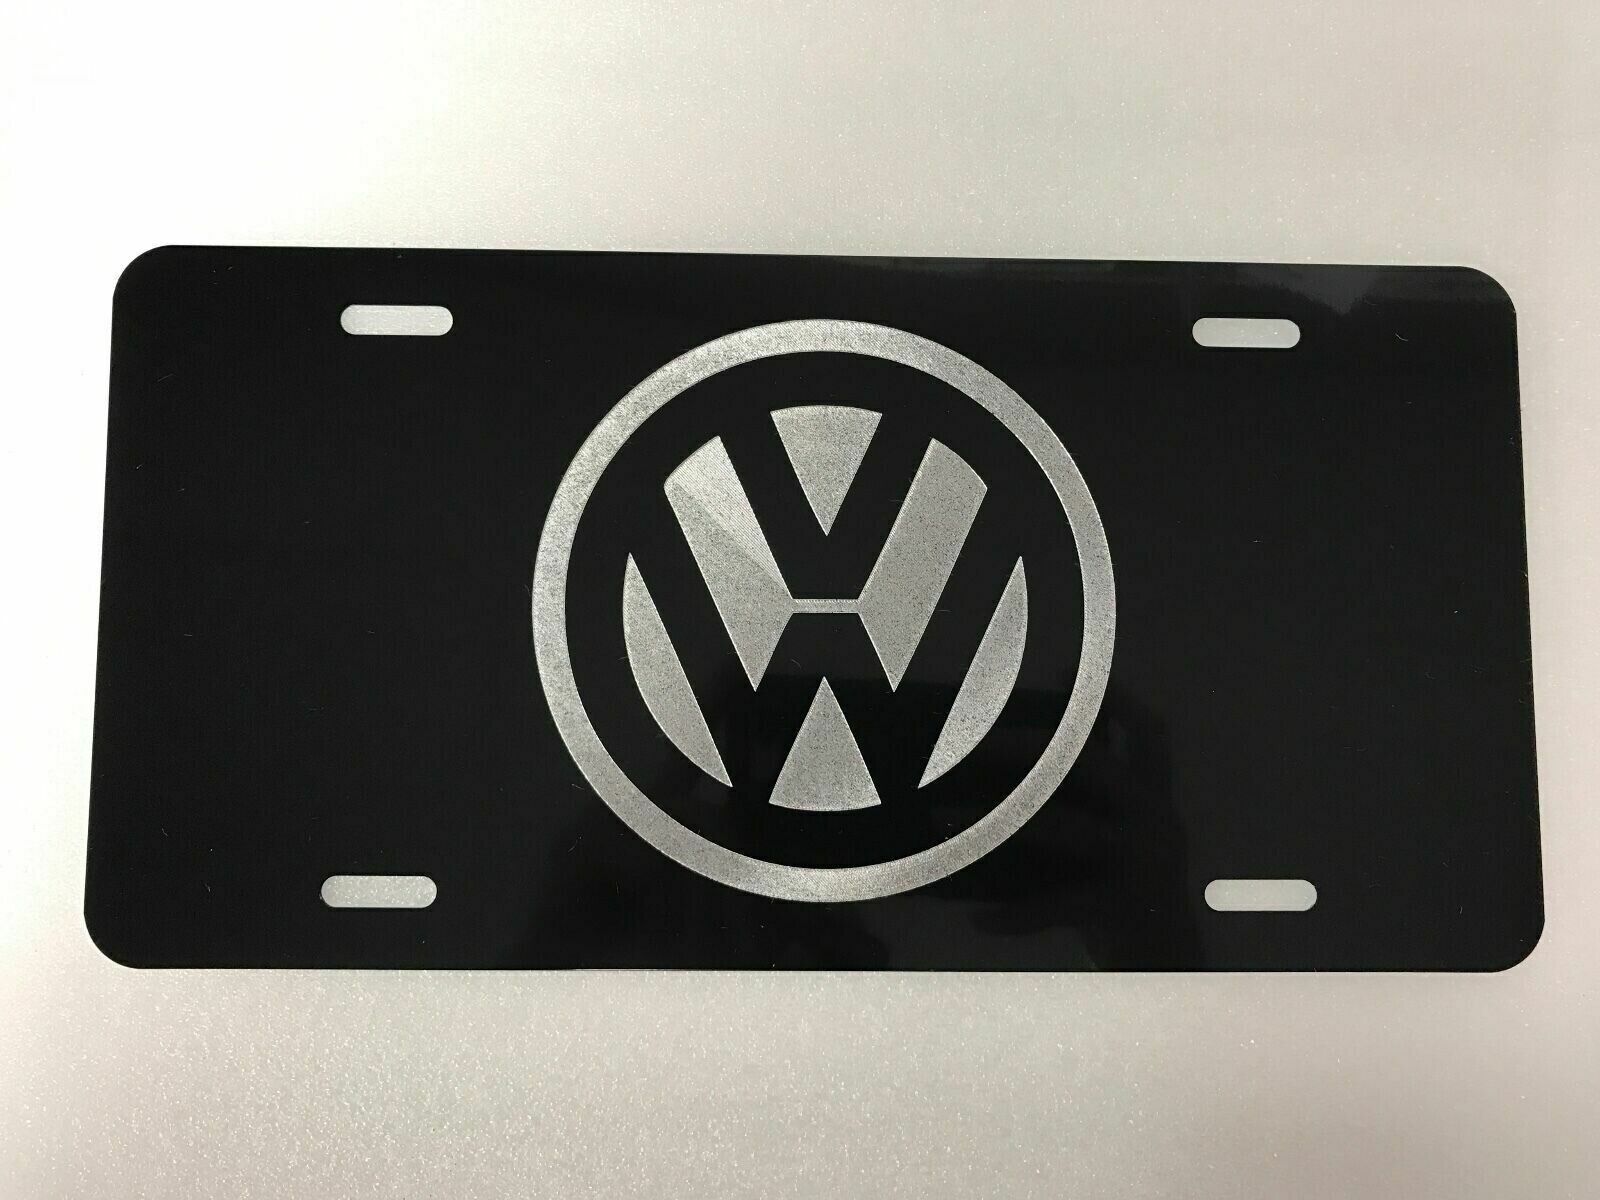 LASER ETCHED VOLKSWAGEN BLACK POWDER COATED STAINLESS STEEL FRONT PLATE  W/ CAPS